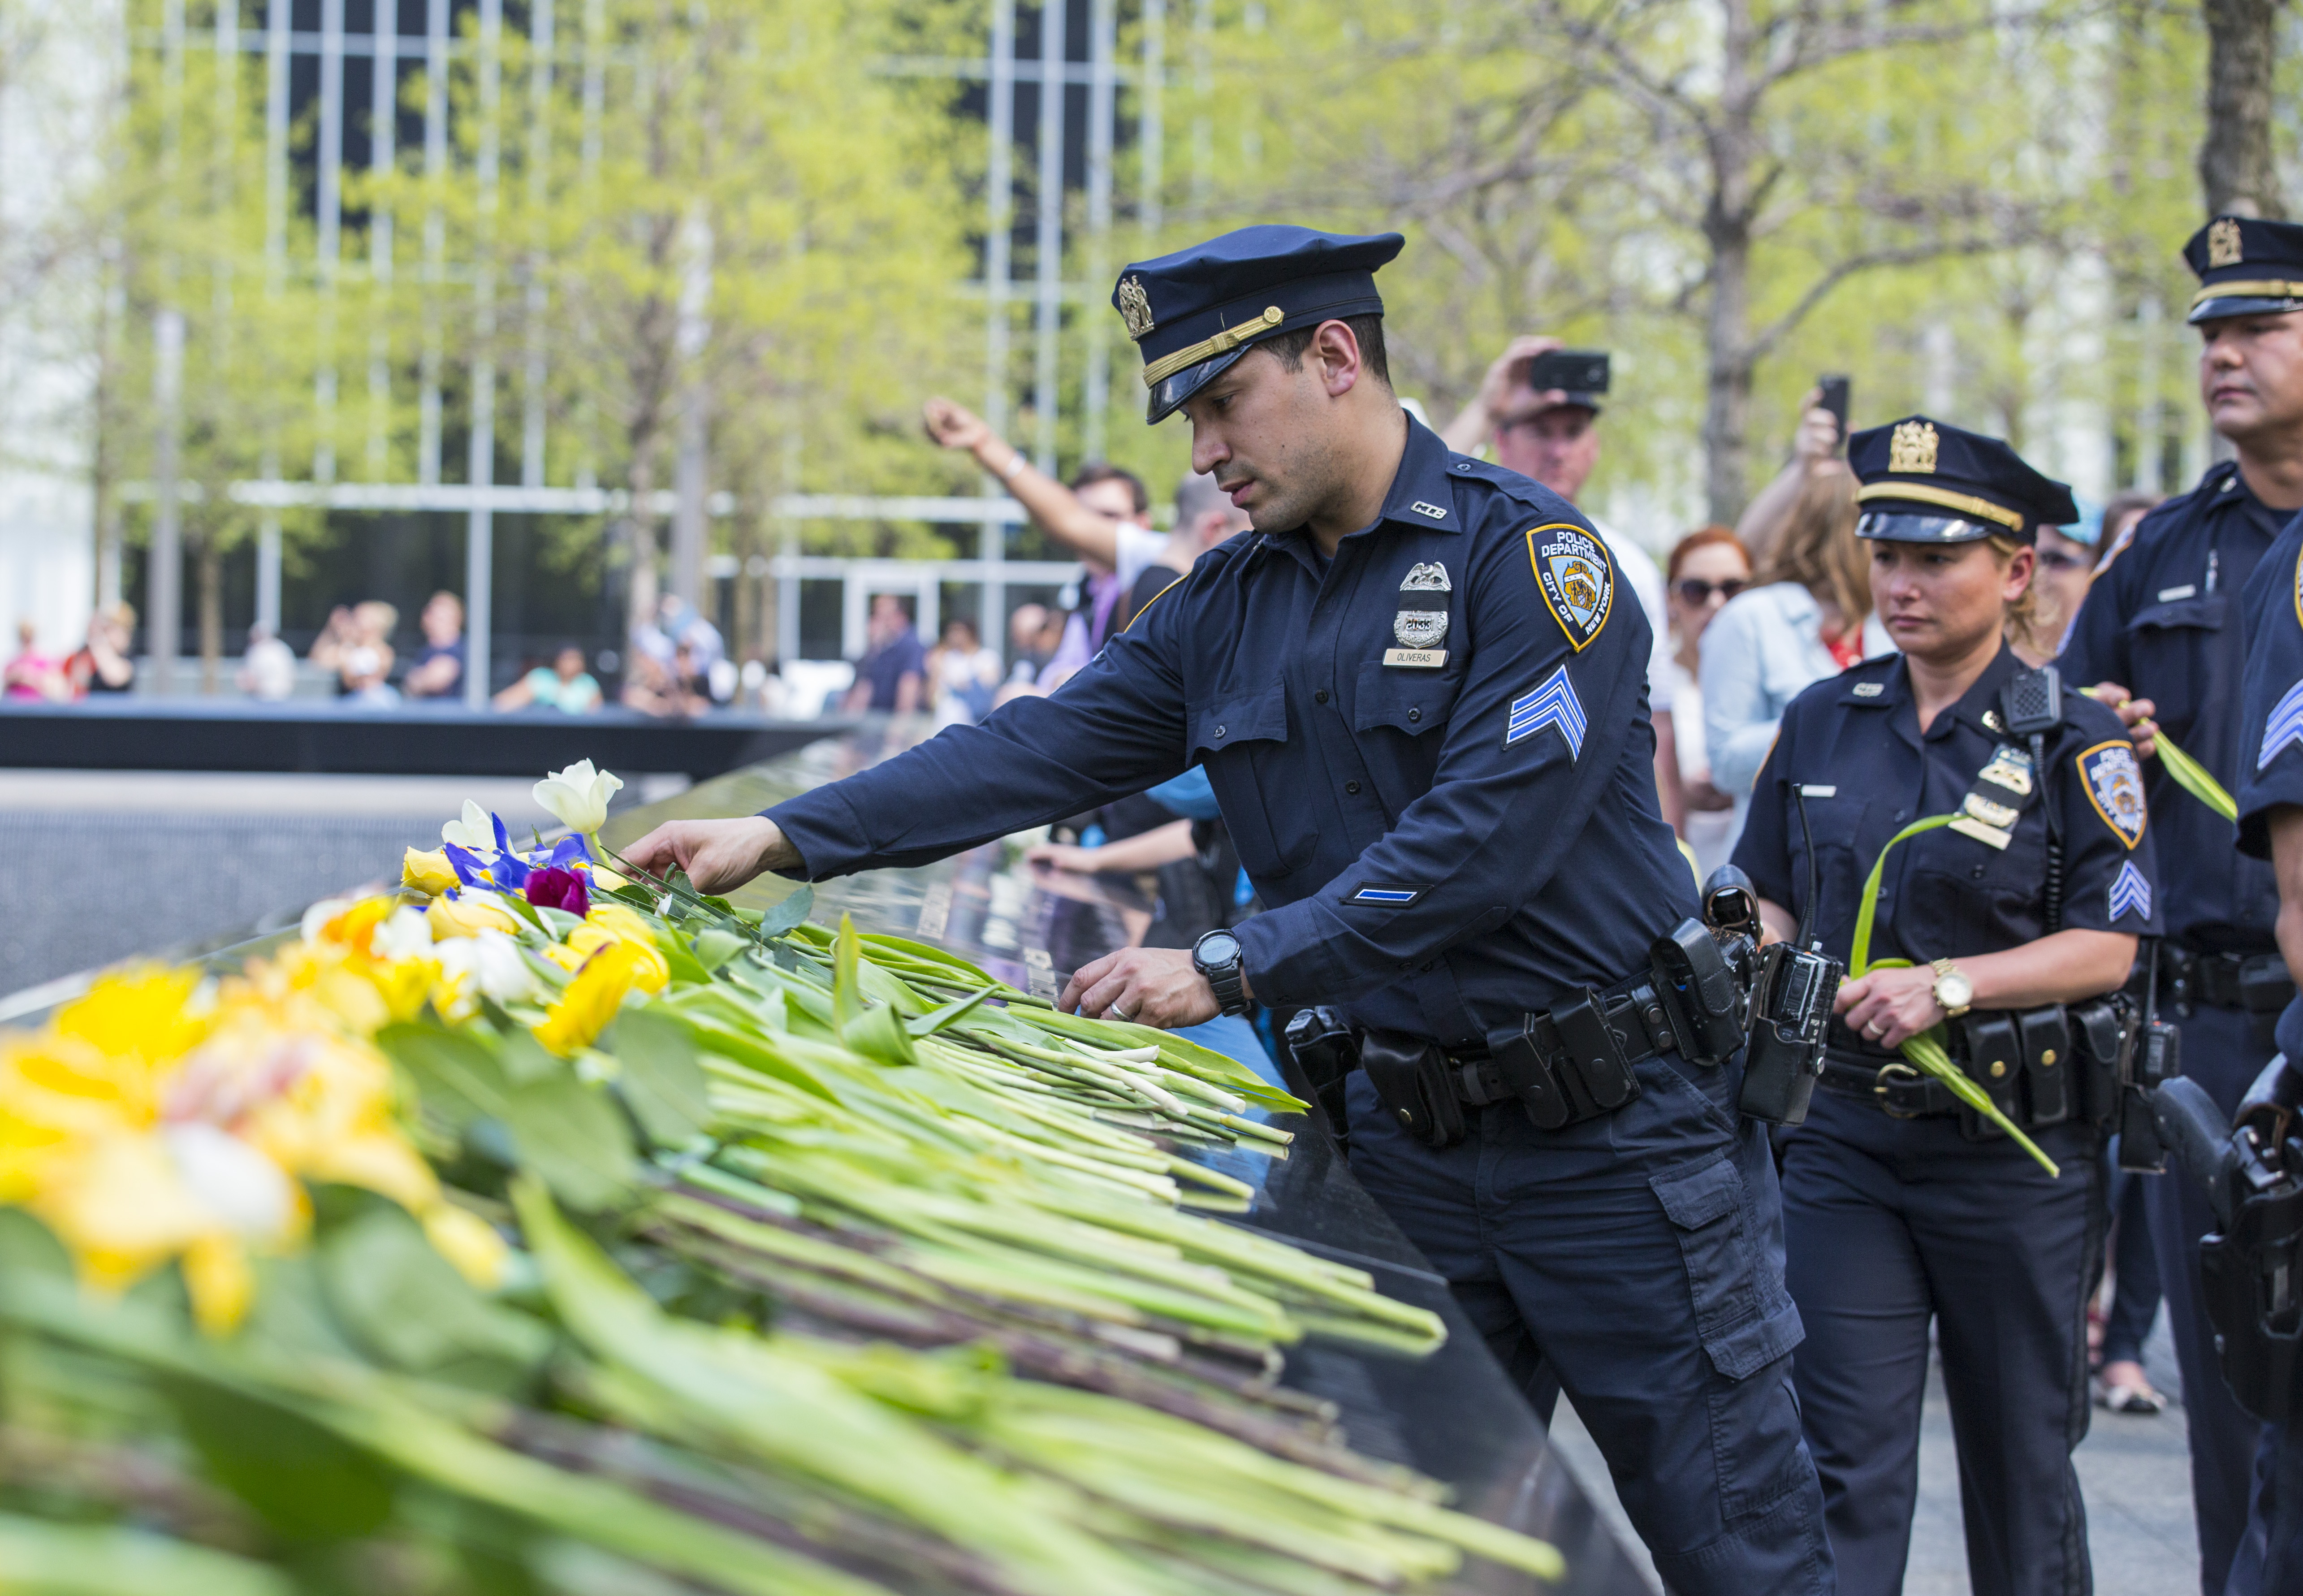 NYPD officers place flowers on the inscribed names of officers who died on 9/11.